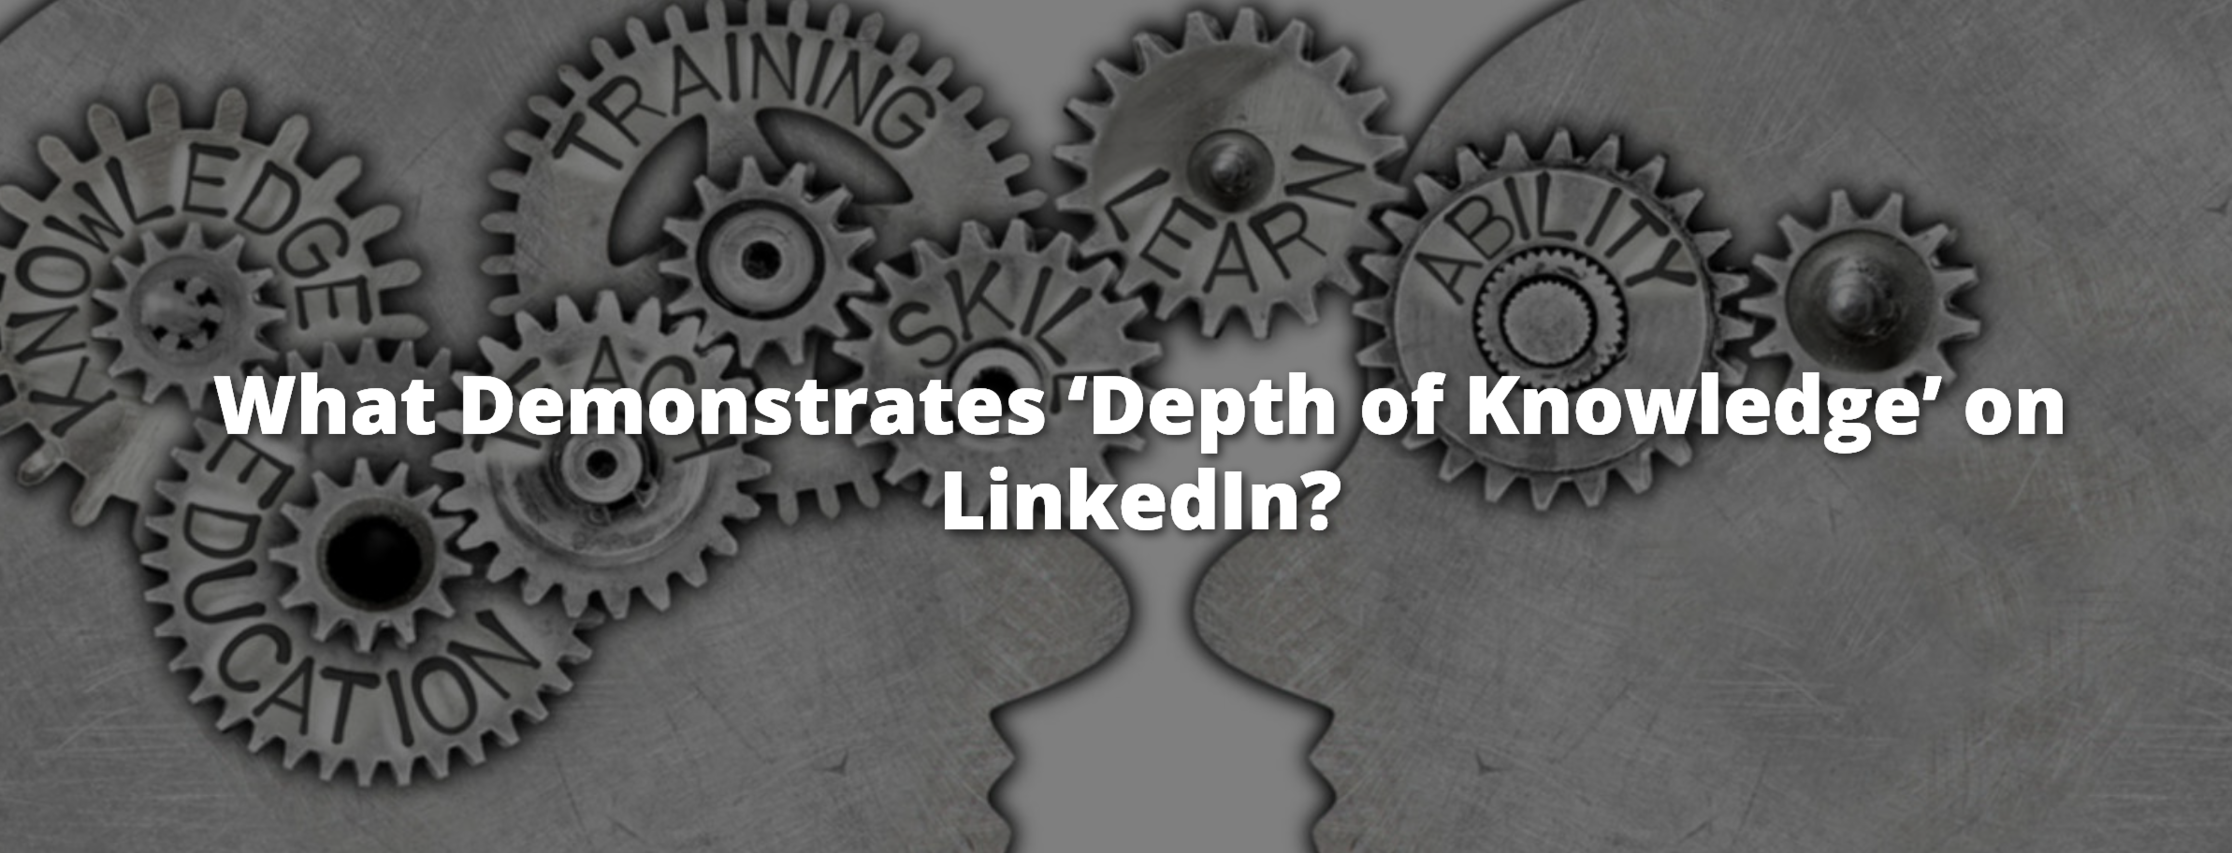 LinkedIn Content Ideas, What Demonstrates Depth of Knowledge on LinkedIn